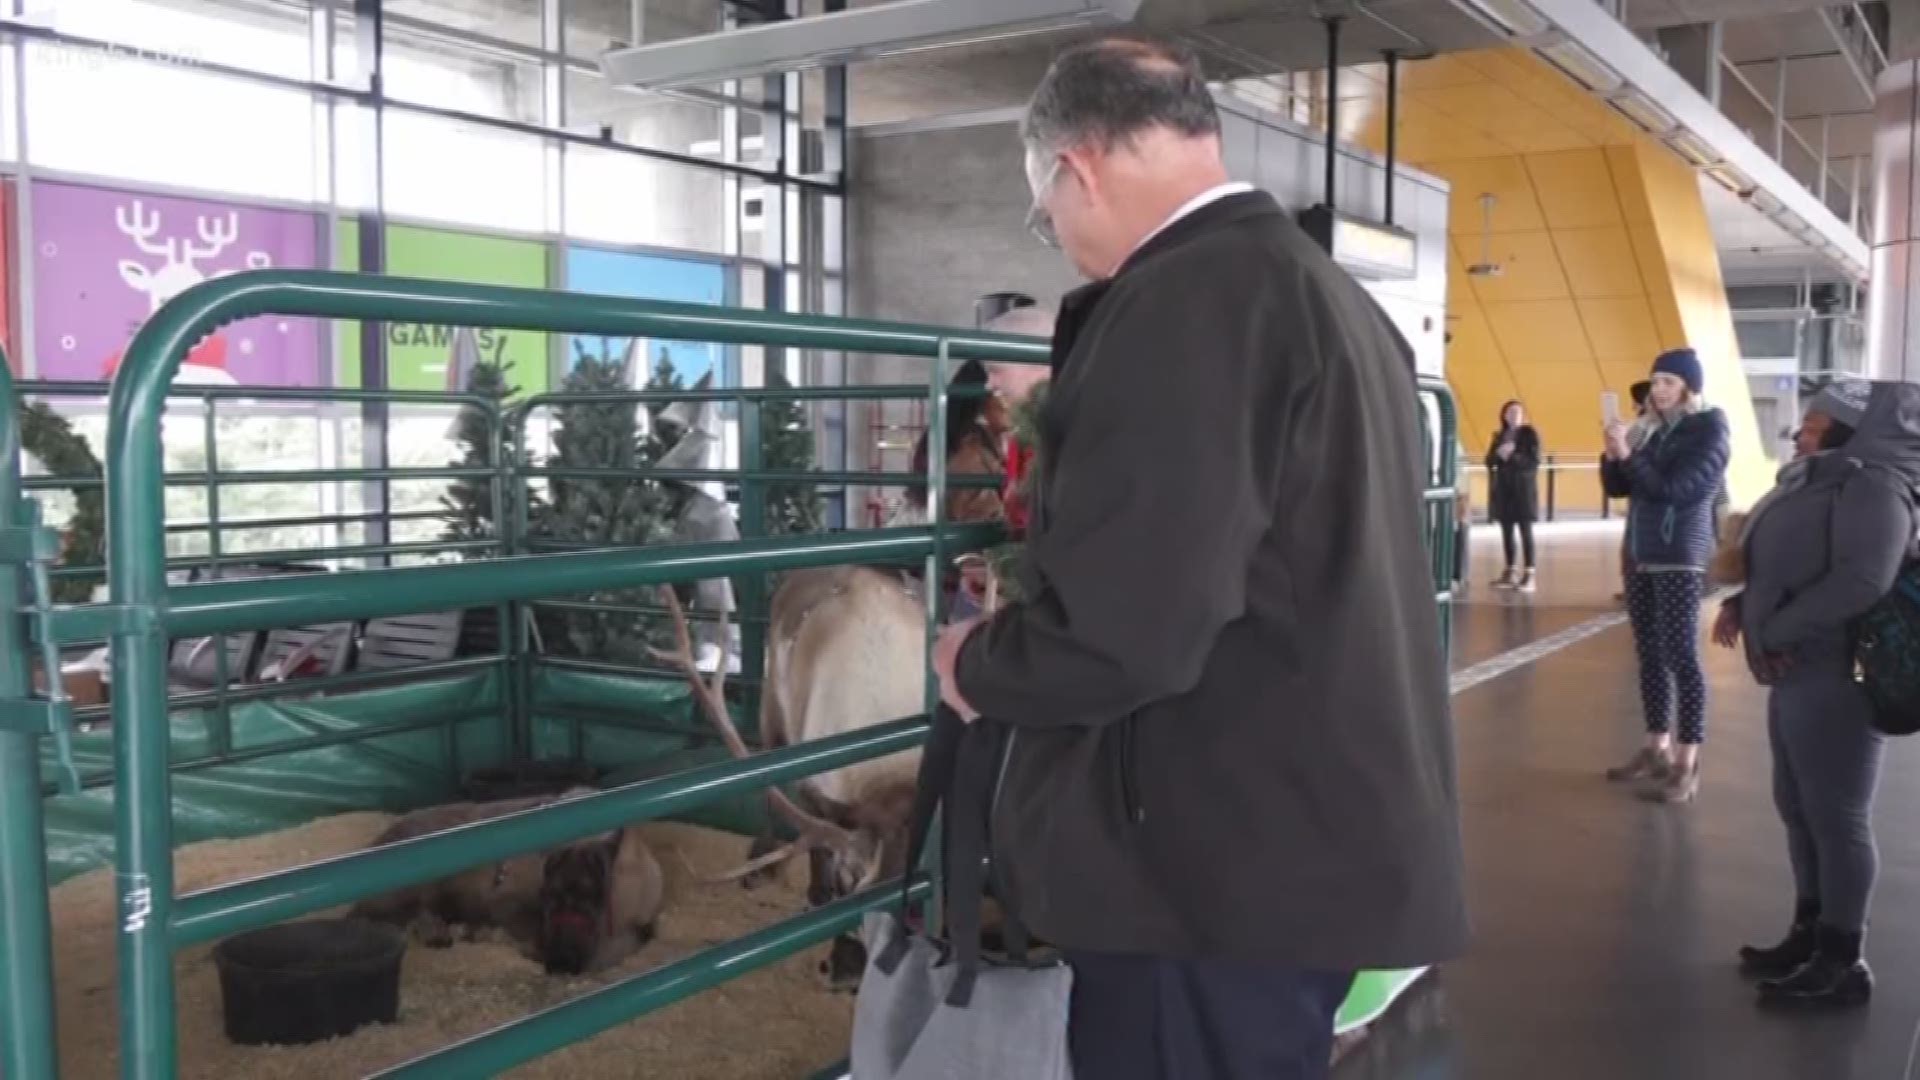 Reindeer hung out at Sea-Tac Airport's Light Rail platform and surprised holiday travelers.